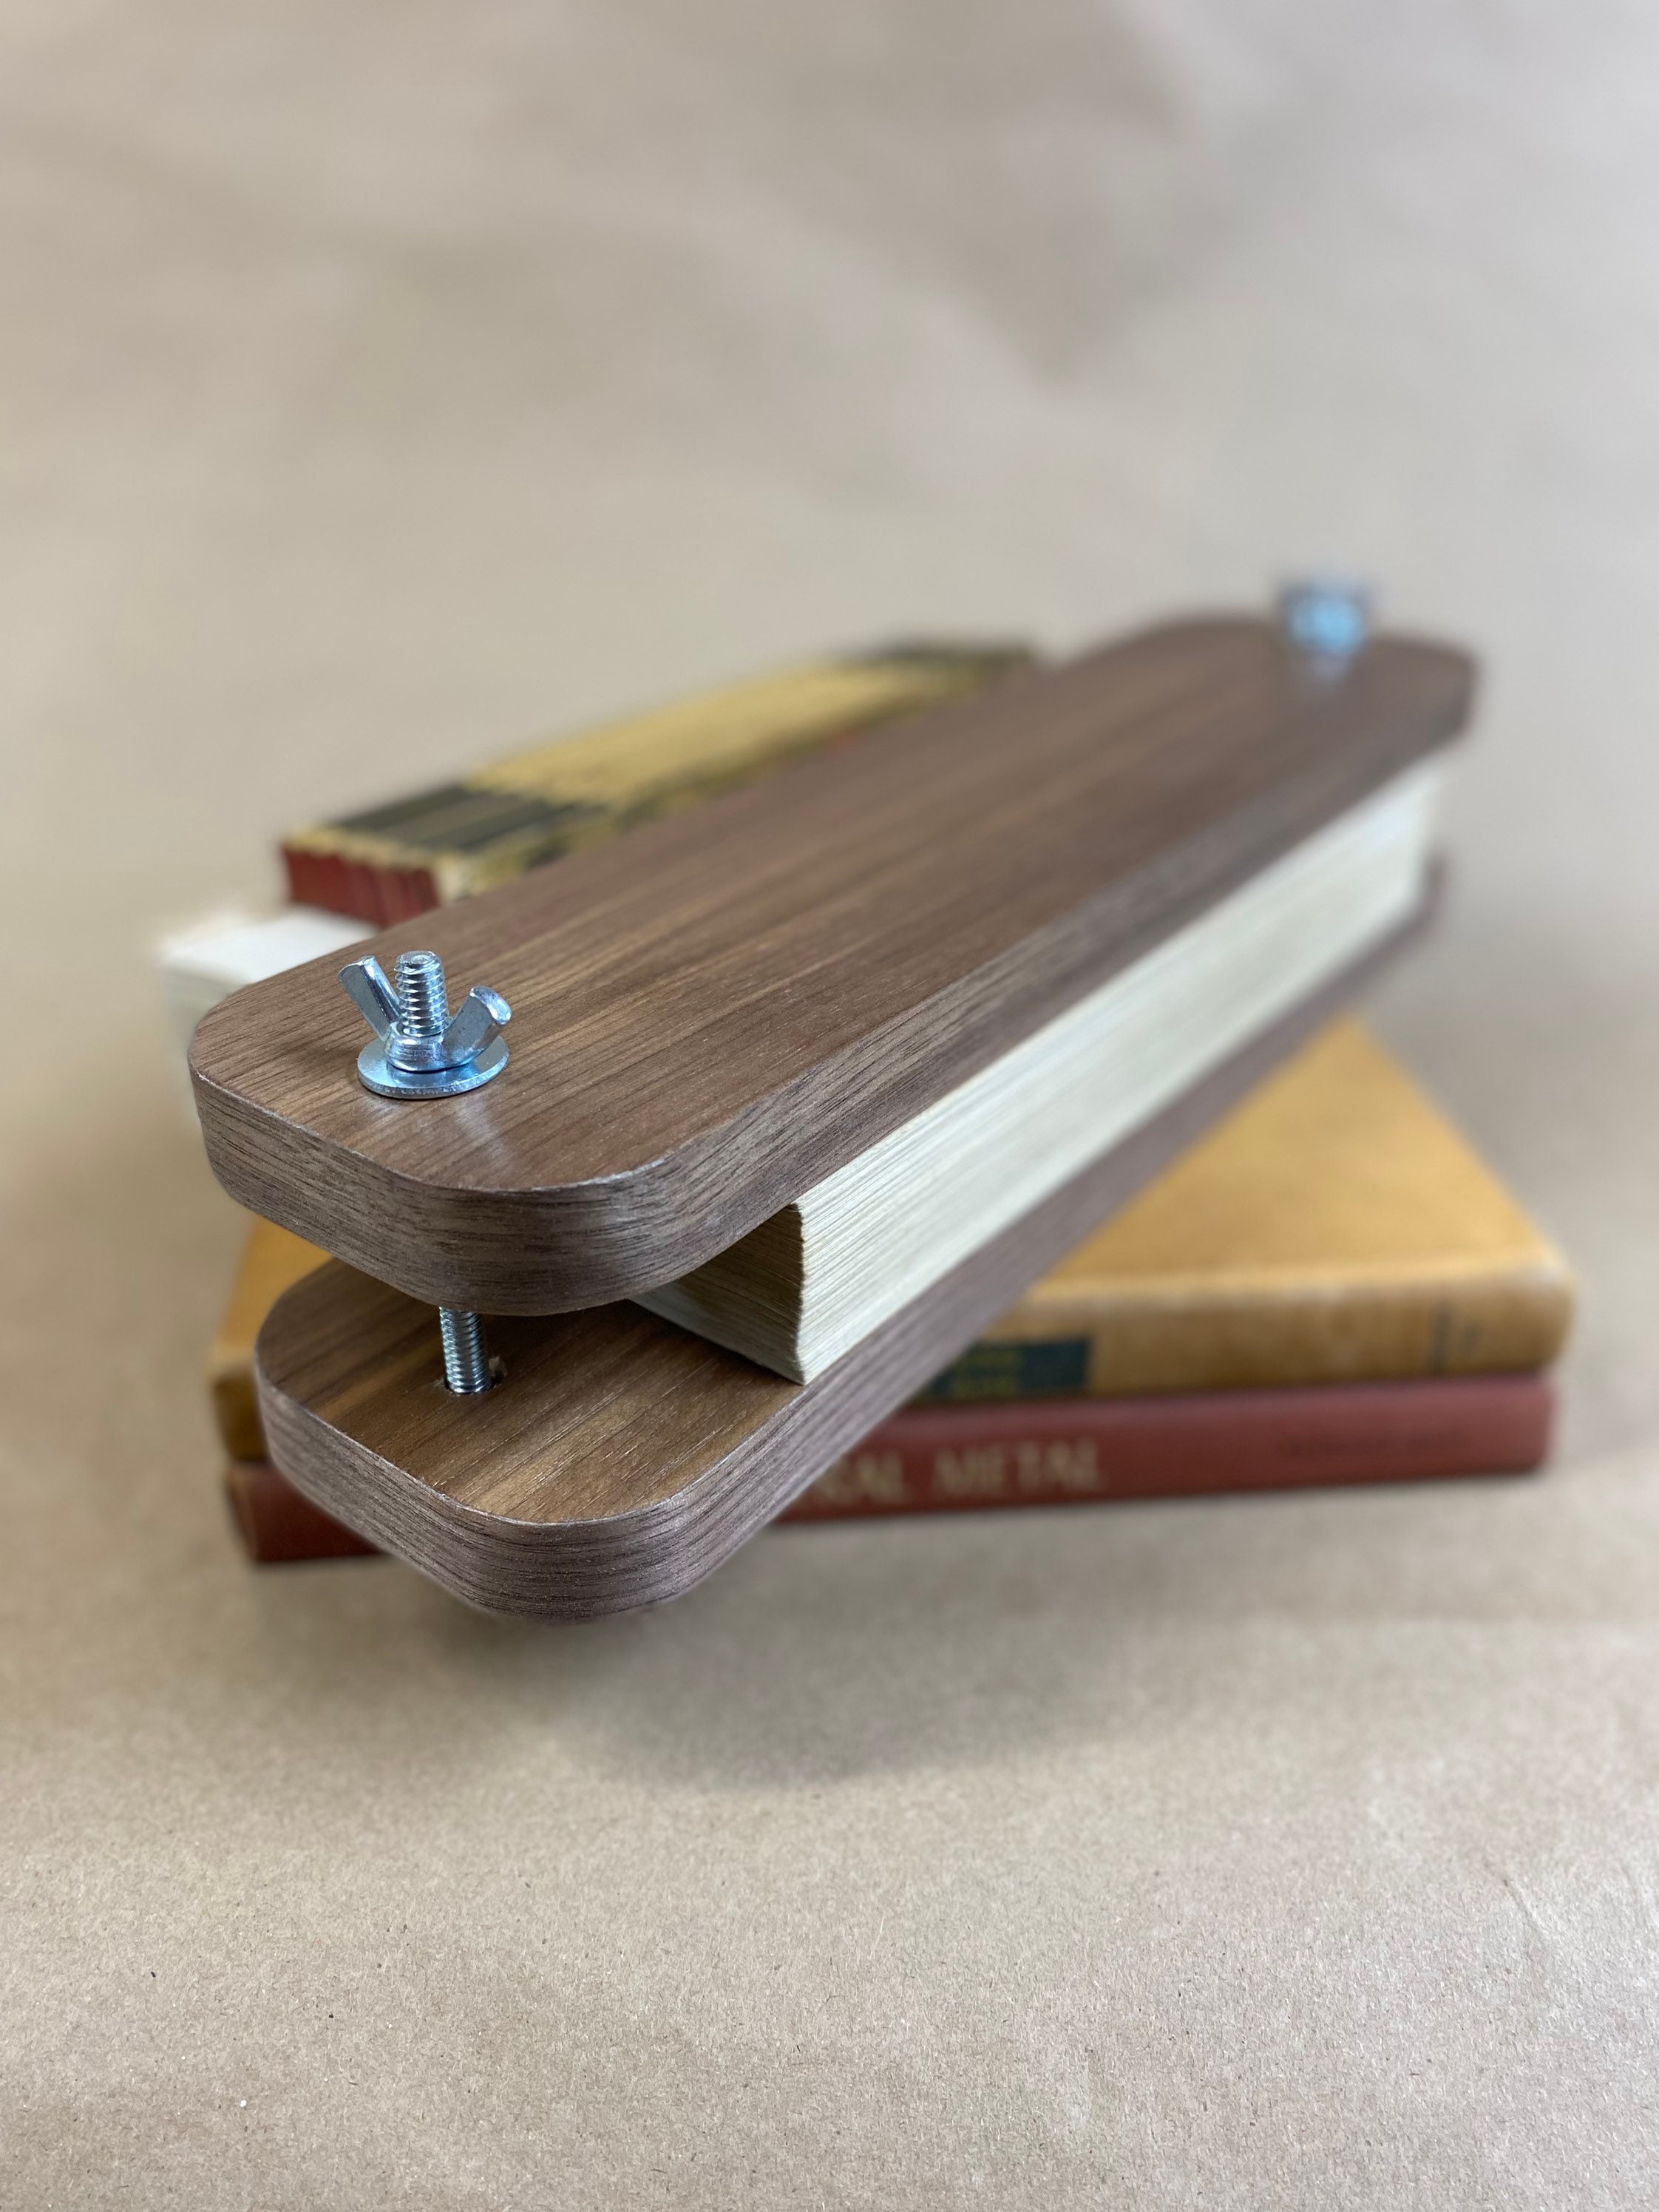 New Finishing Press for my obsession : r/bookbinding